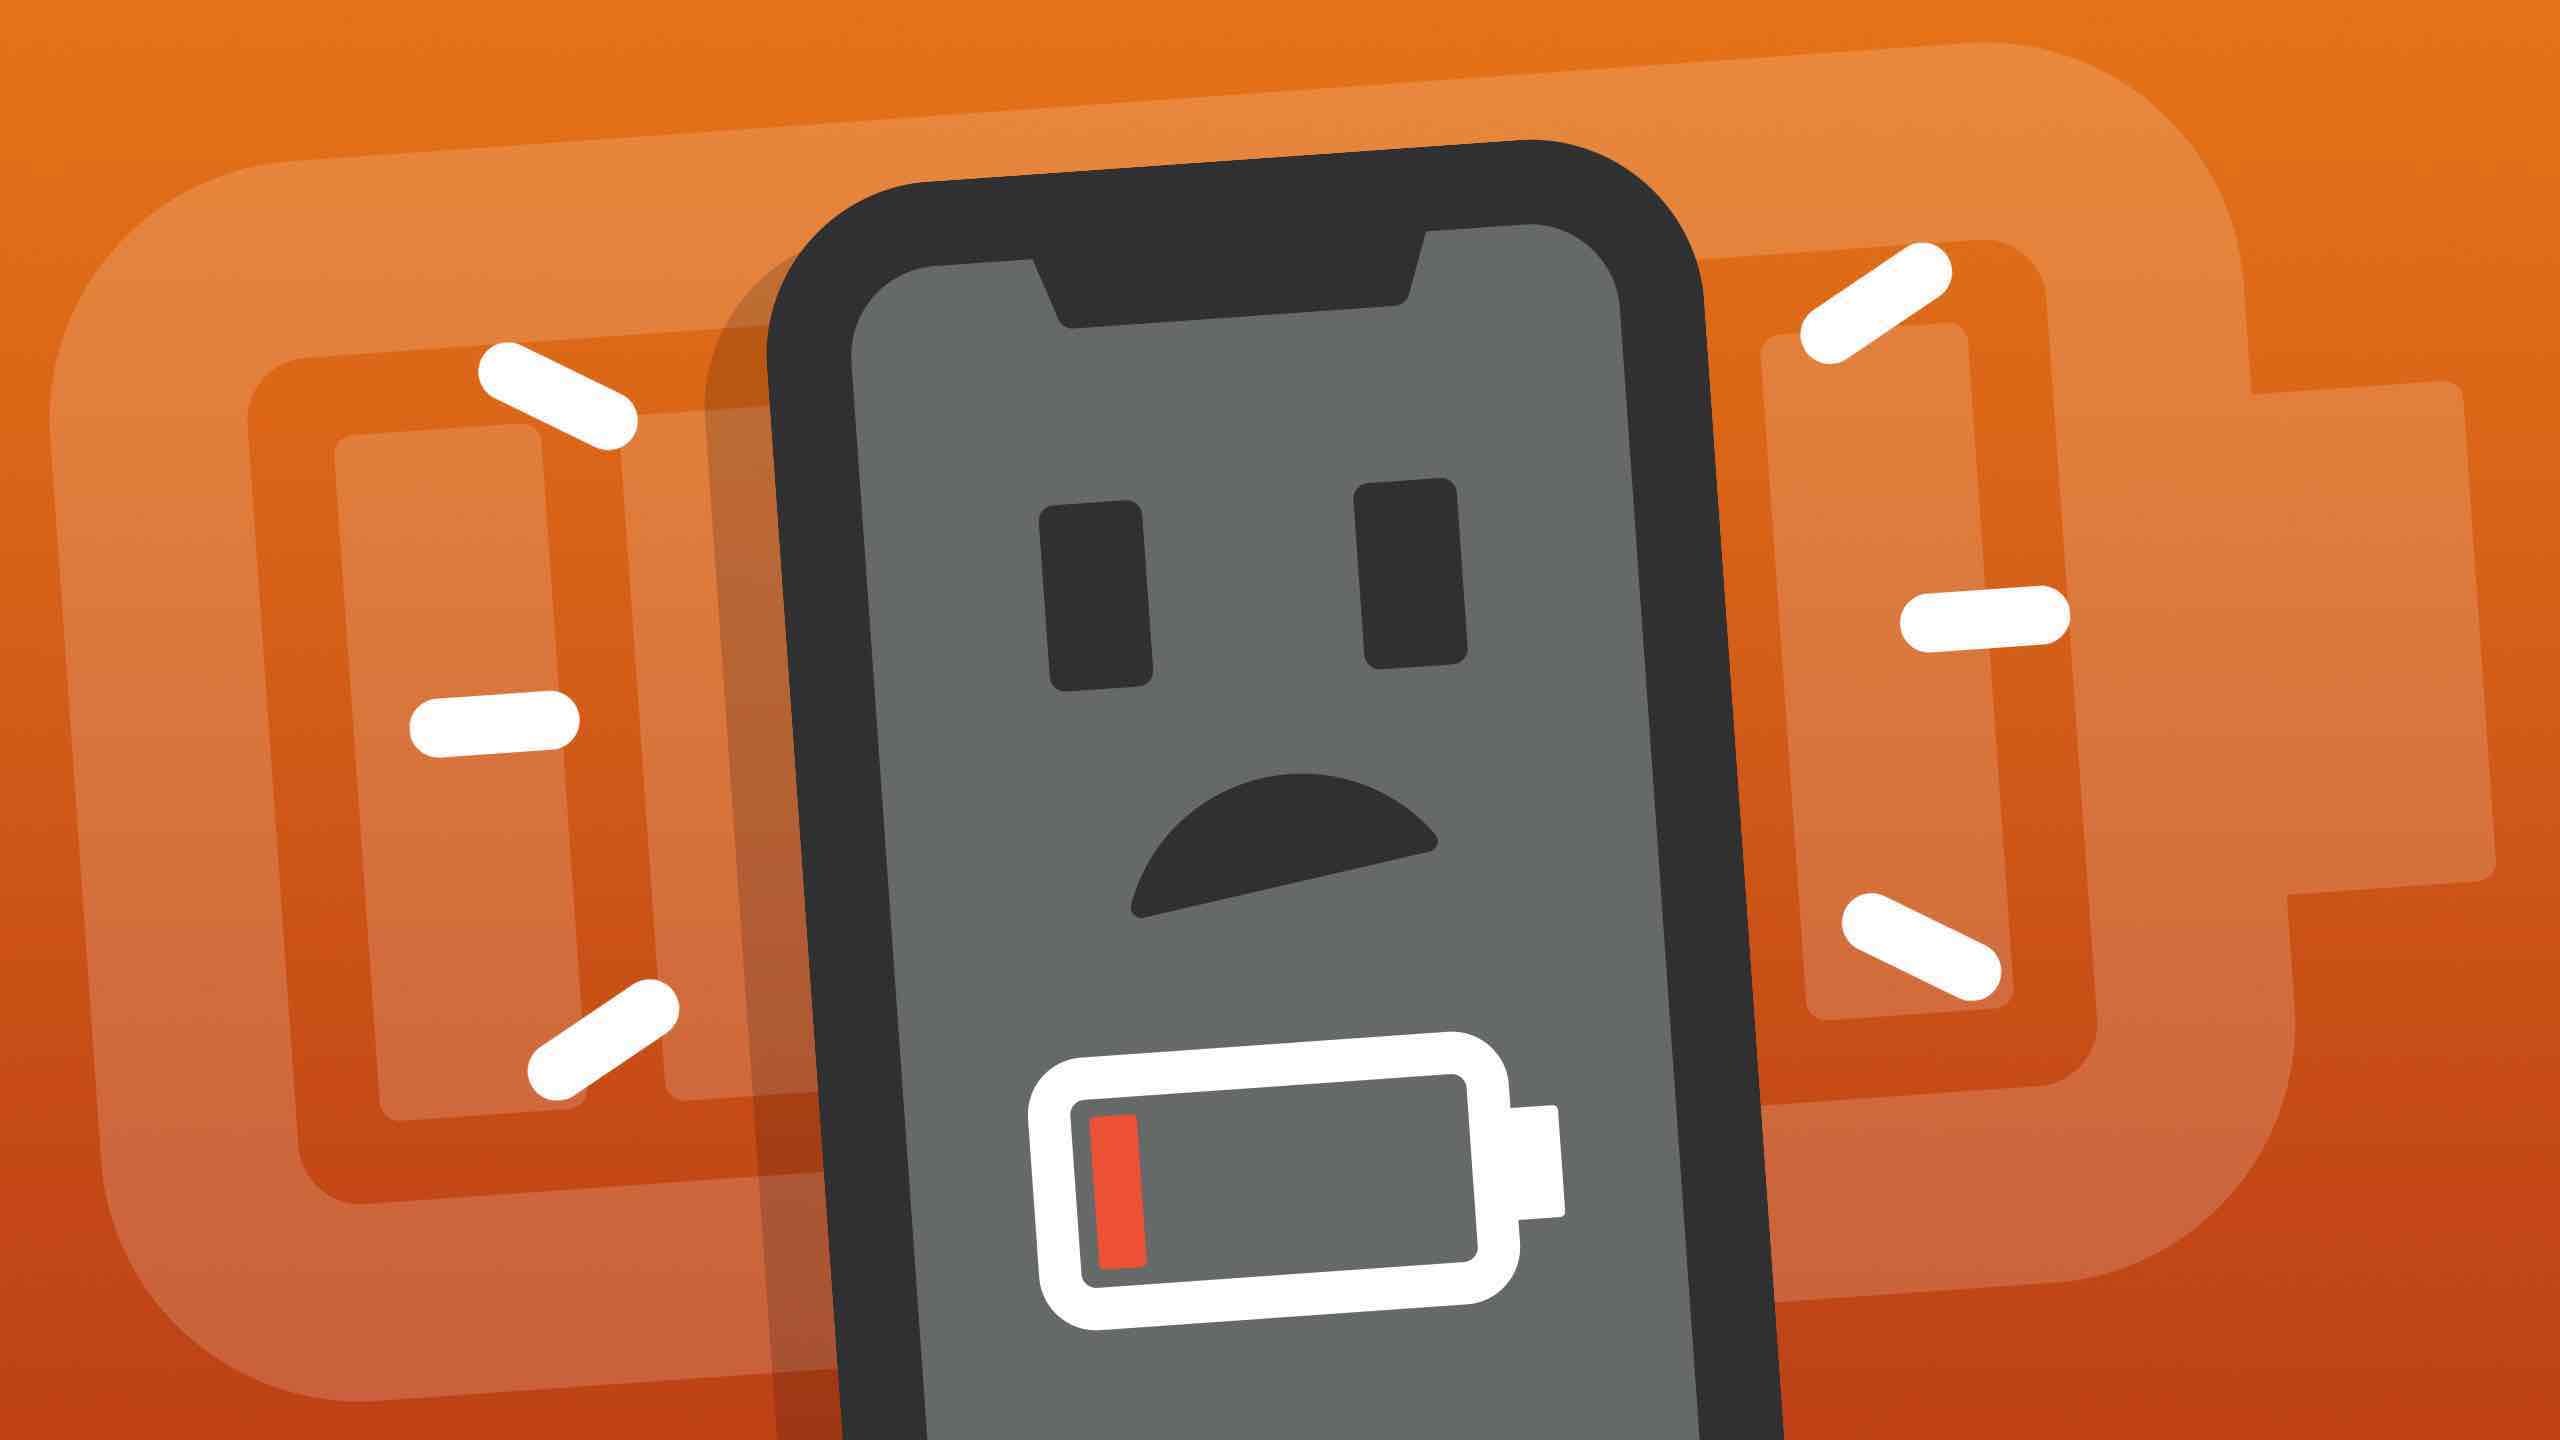 Apps that drain your battery the most